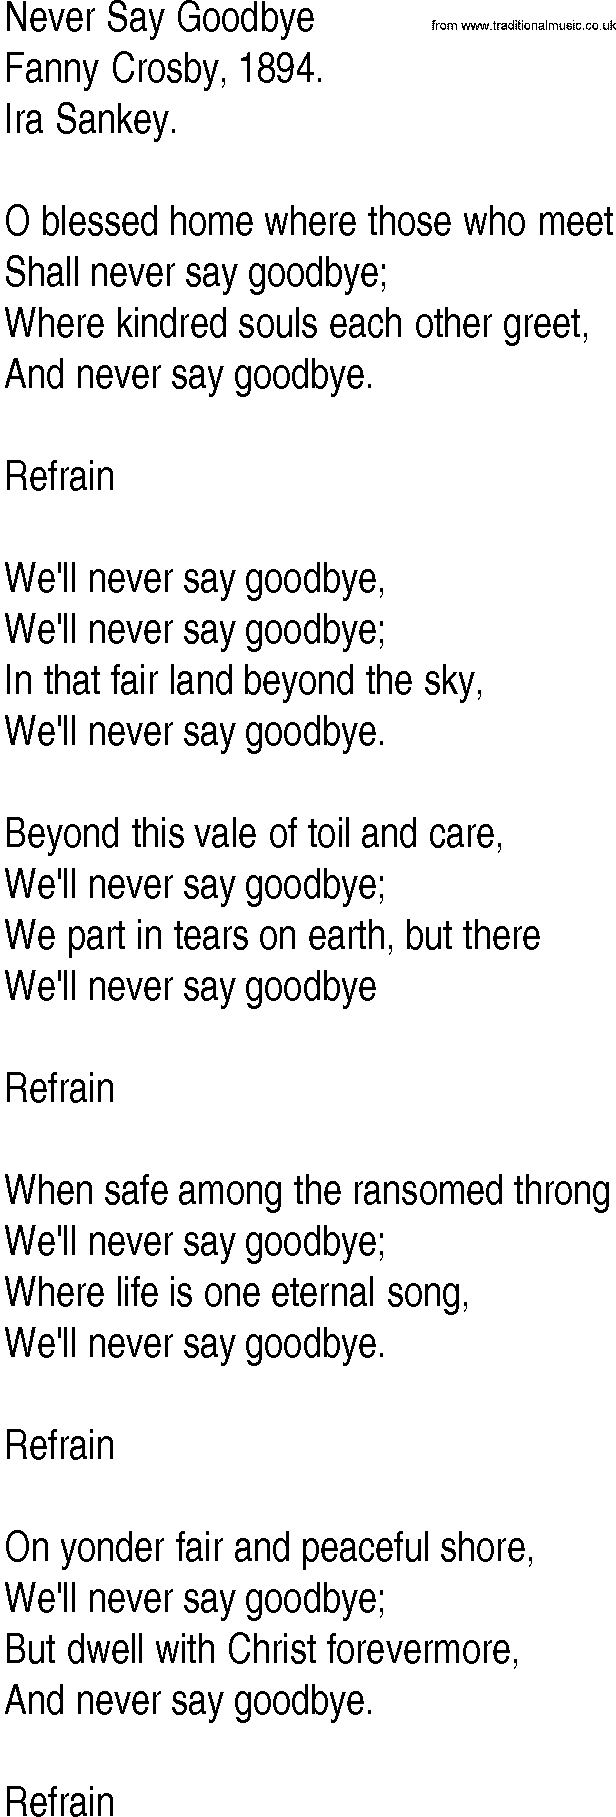 Hymn And Gospel Song Lyrics For Never Say Goodbye By Fanny Crosby Hot Sex Picture